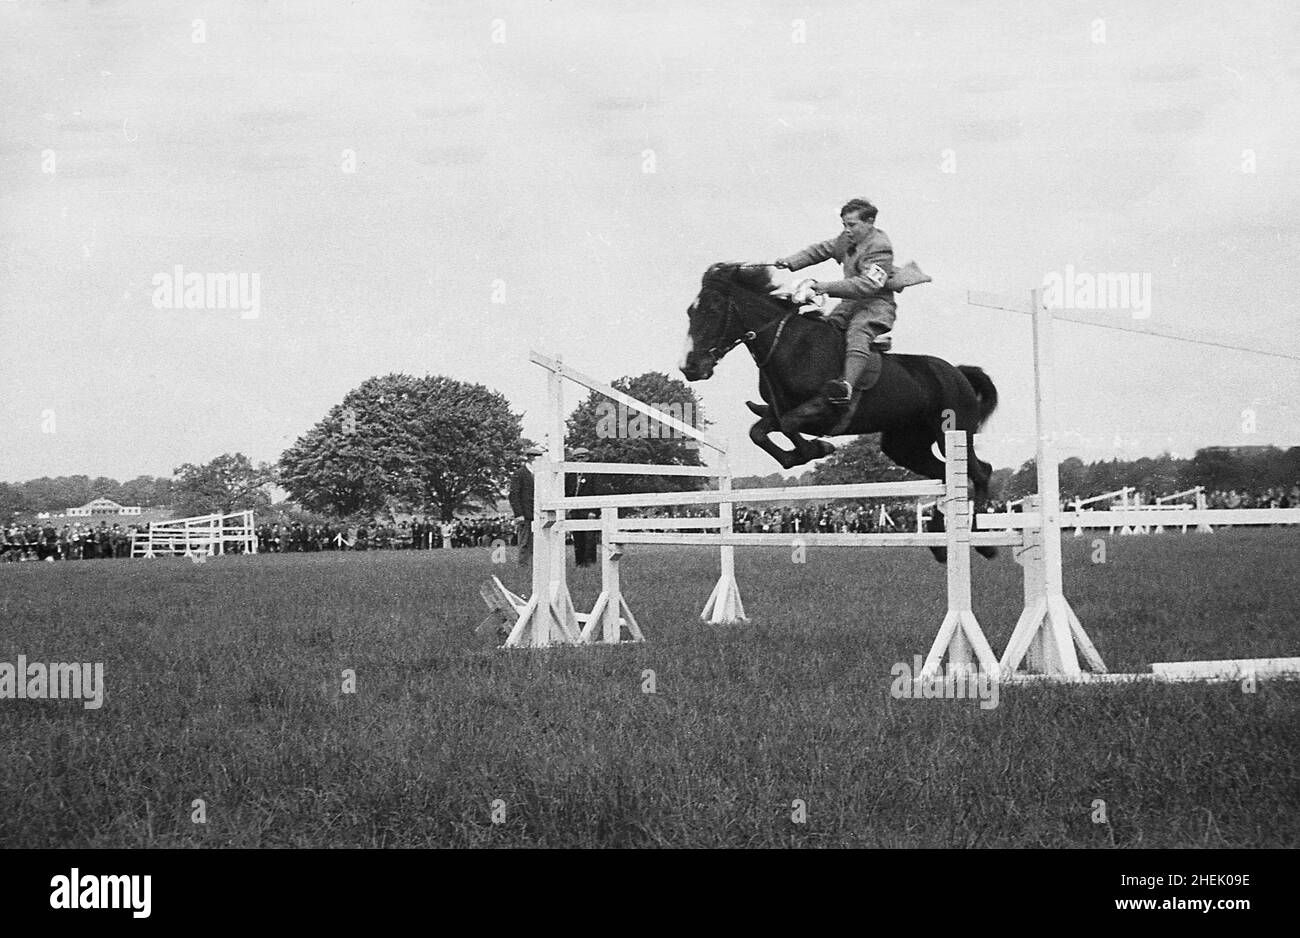 1940s, historical, outside in a field, a young boy on a horse, jumping a fence in an equestrian event at an agricultural show, no helmet, but wearing an official number or armband, England, UK. Stock Photo